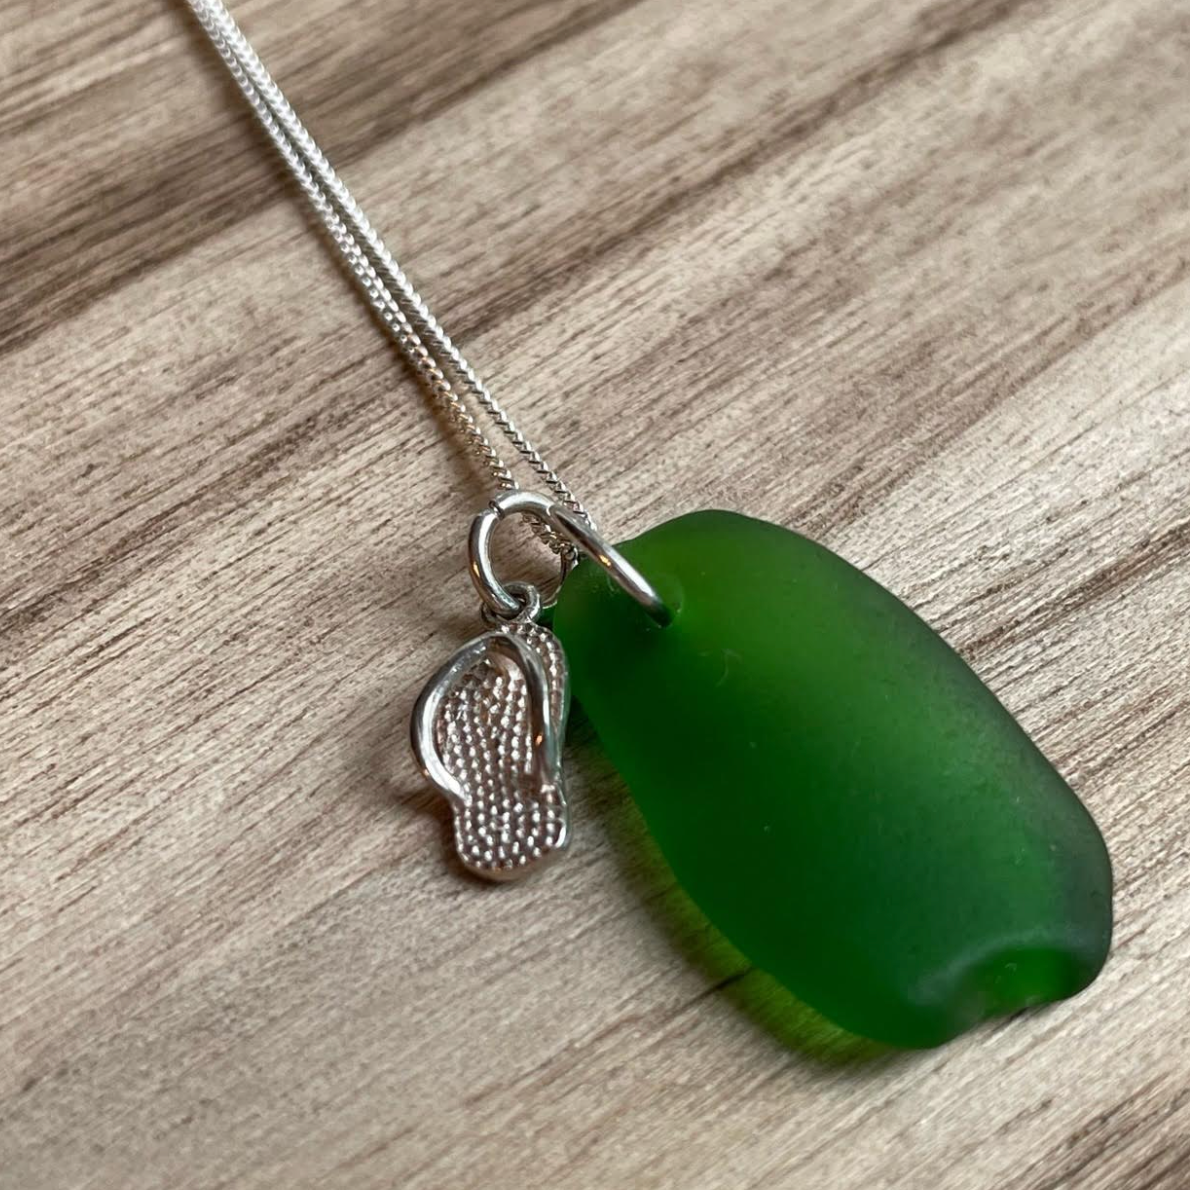 Kelly Green Pendant With Flip Flop by Shoreline Angel (SG1097)